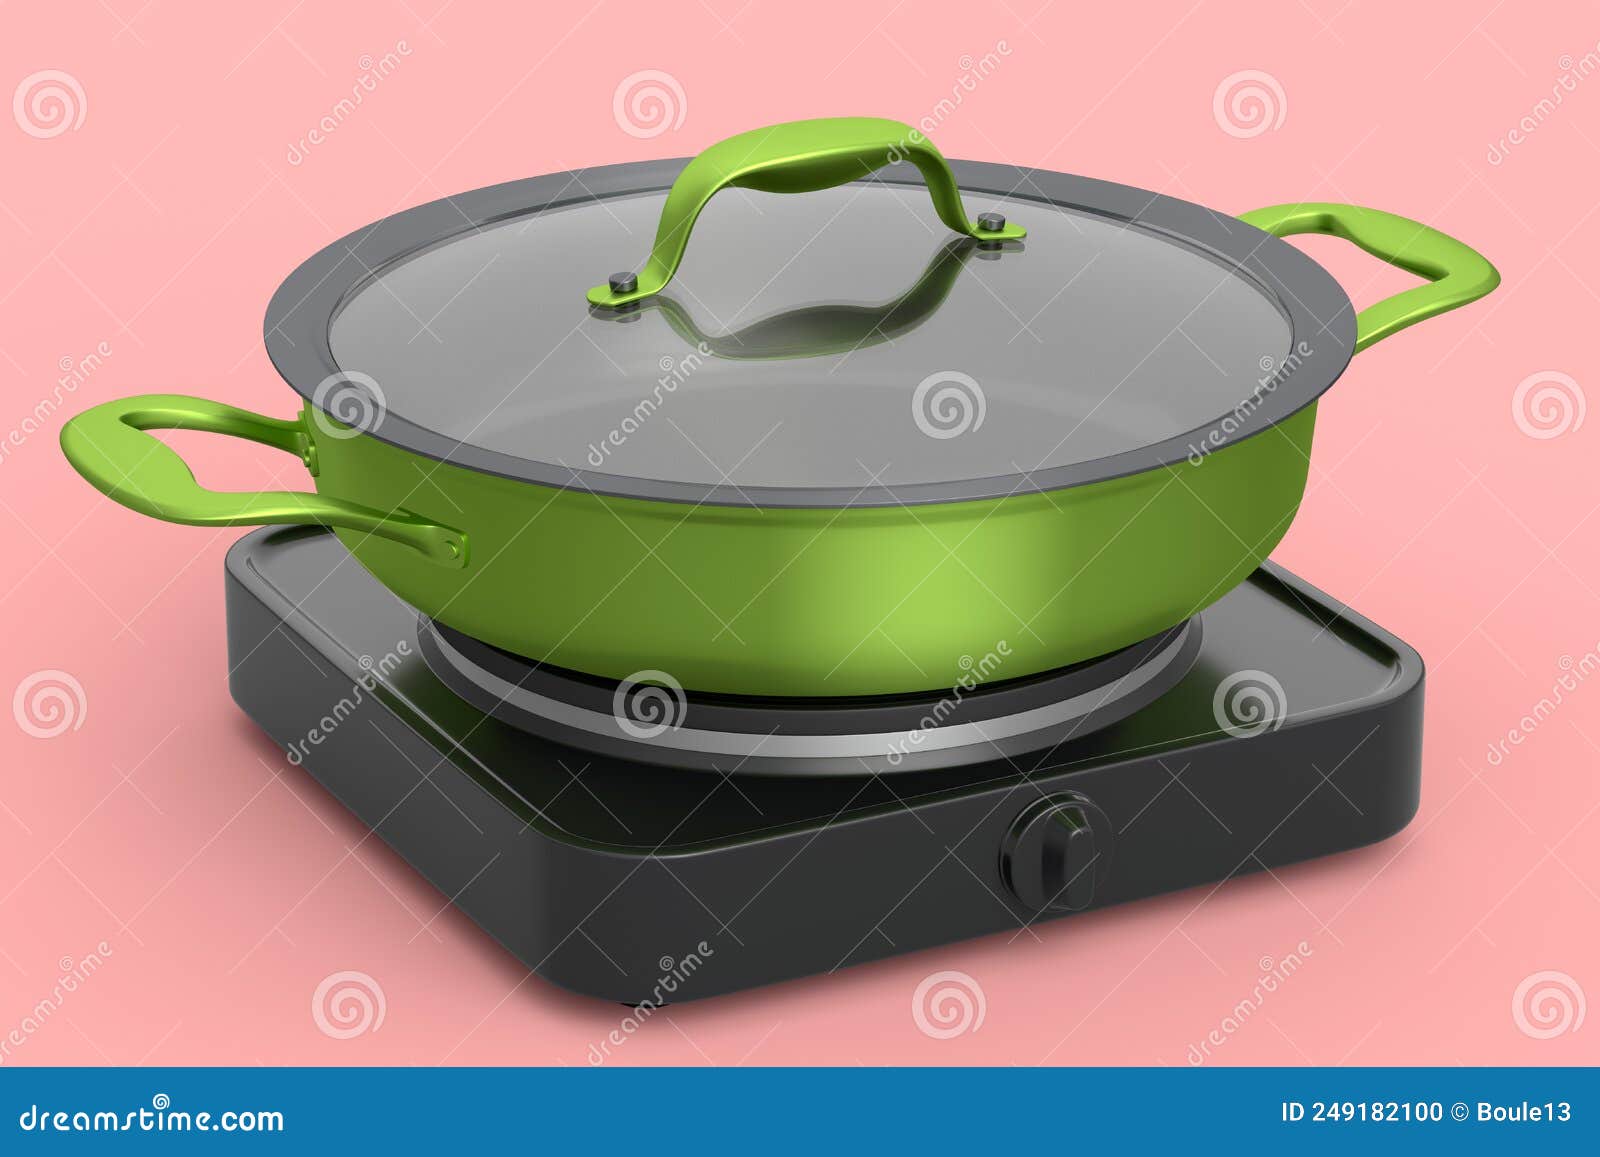 https://thumbs.dreamstime.com/z/frying-pan-wok-glass-lid-portable-camping-electric-stove-frying-pan-wok-glass-lid-portable-camping-electric-249182100.jpg